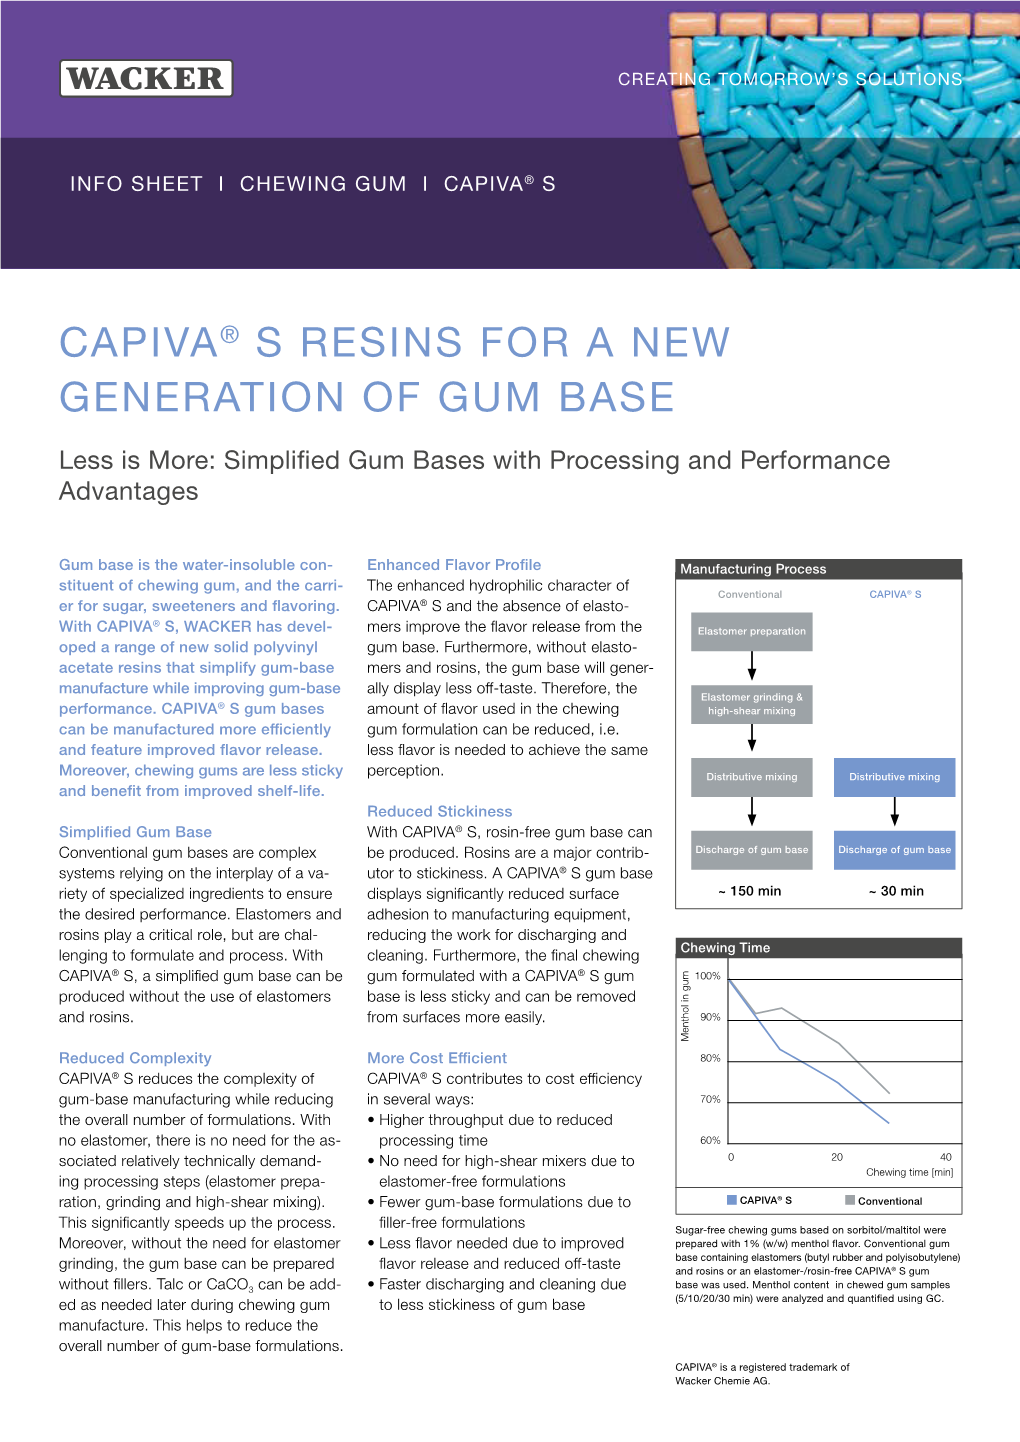 Capiva® S Resins for a New Generation of Gum Base